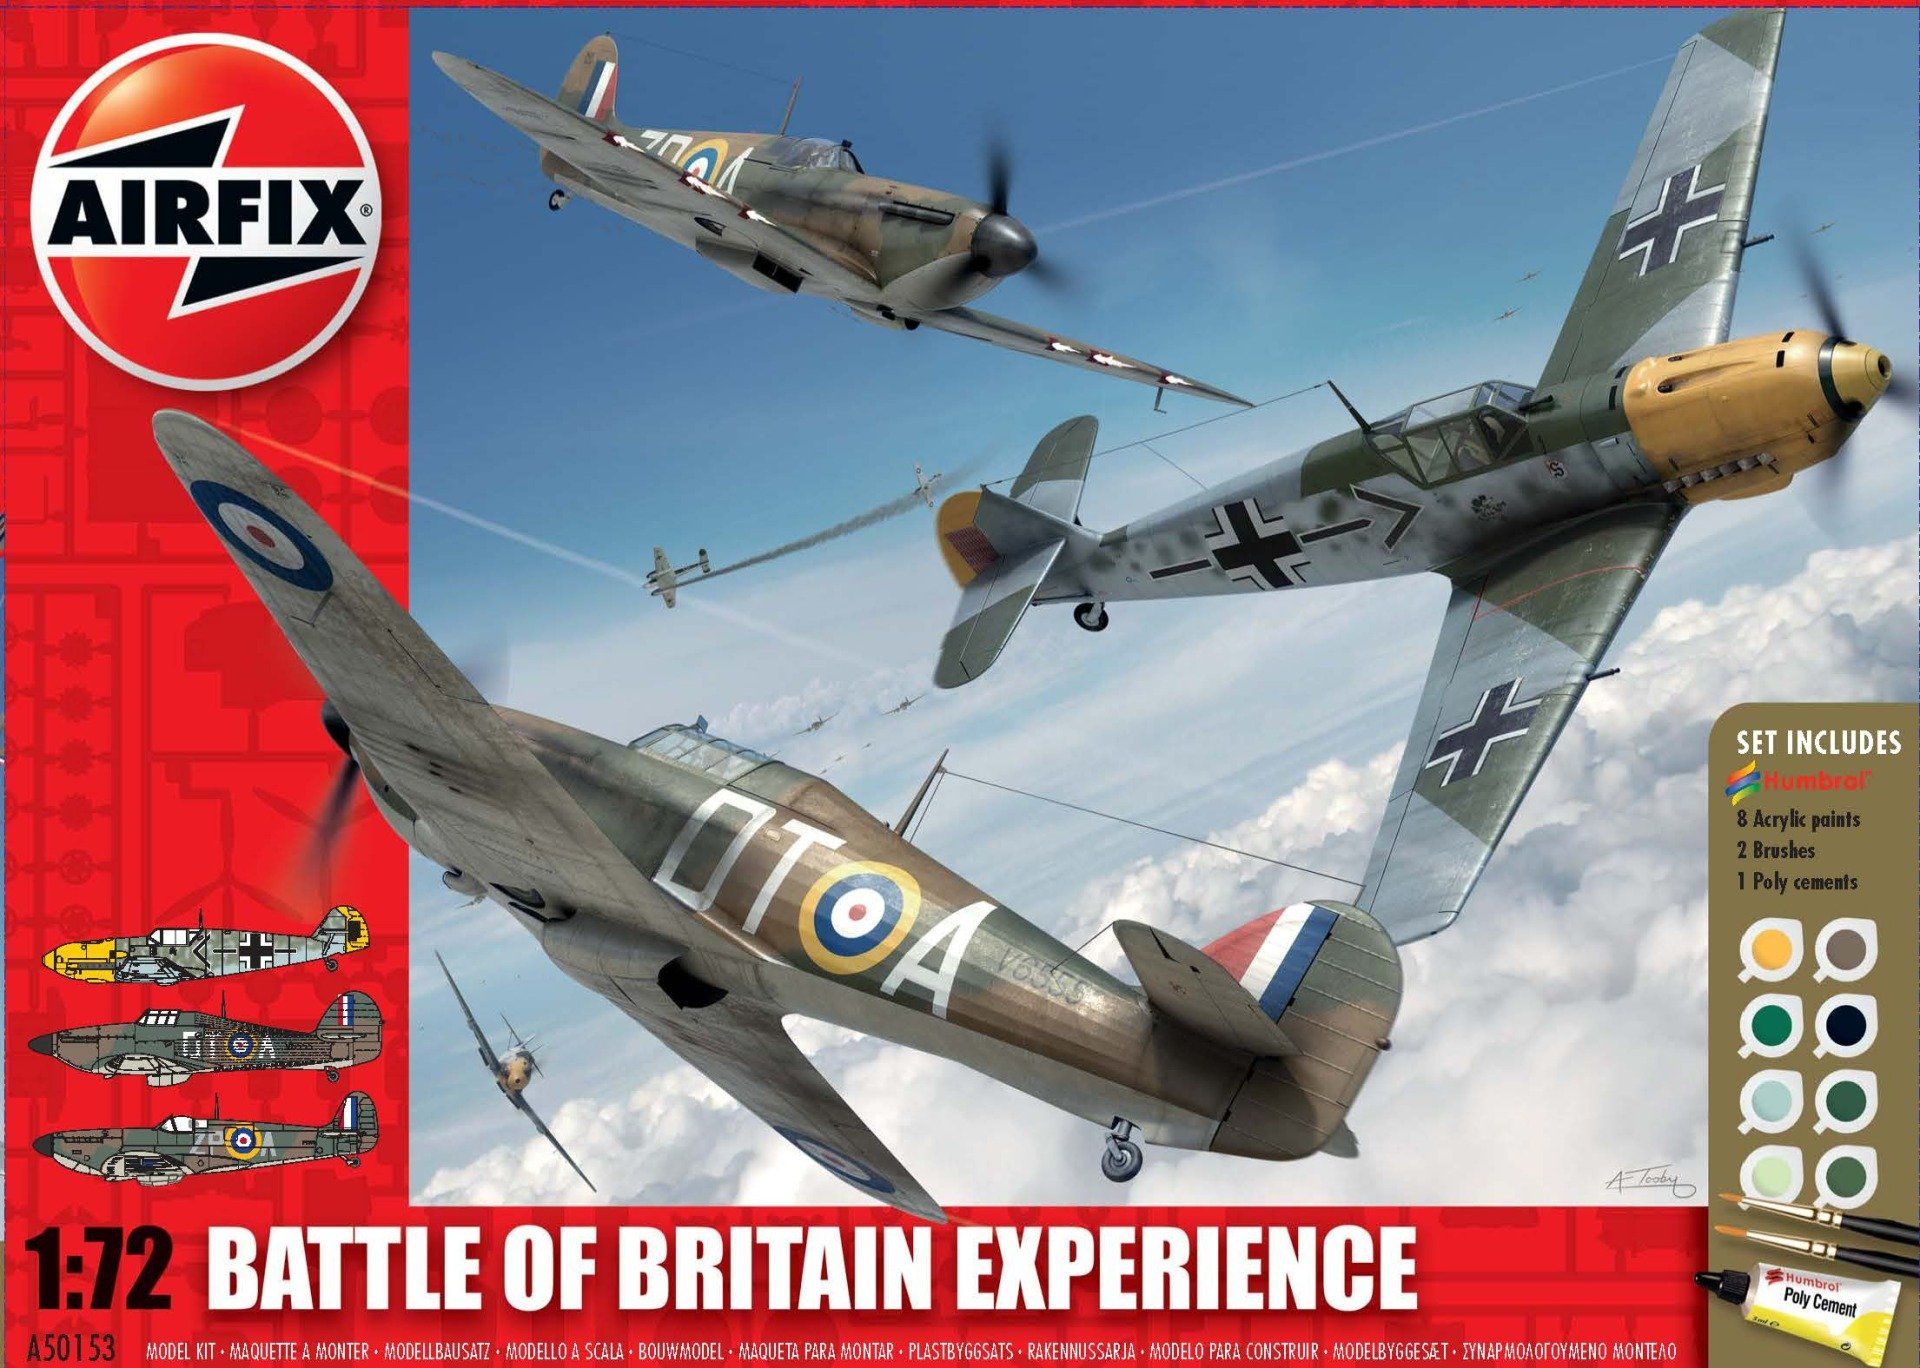 Limited Edition Battle of Britain Experience Airfix Kit